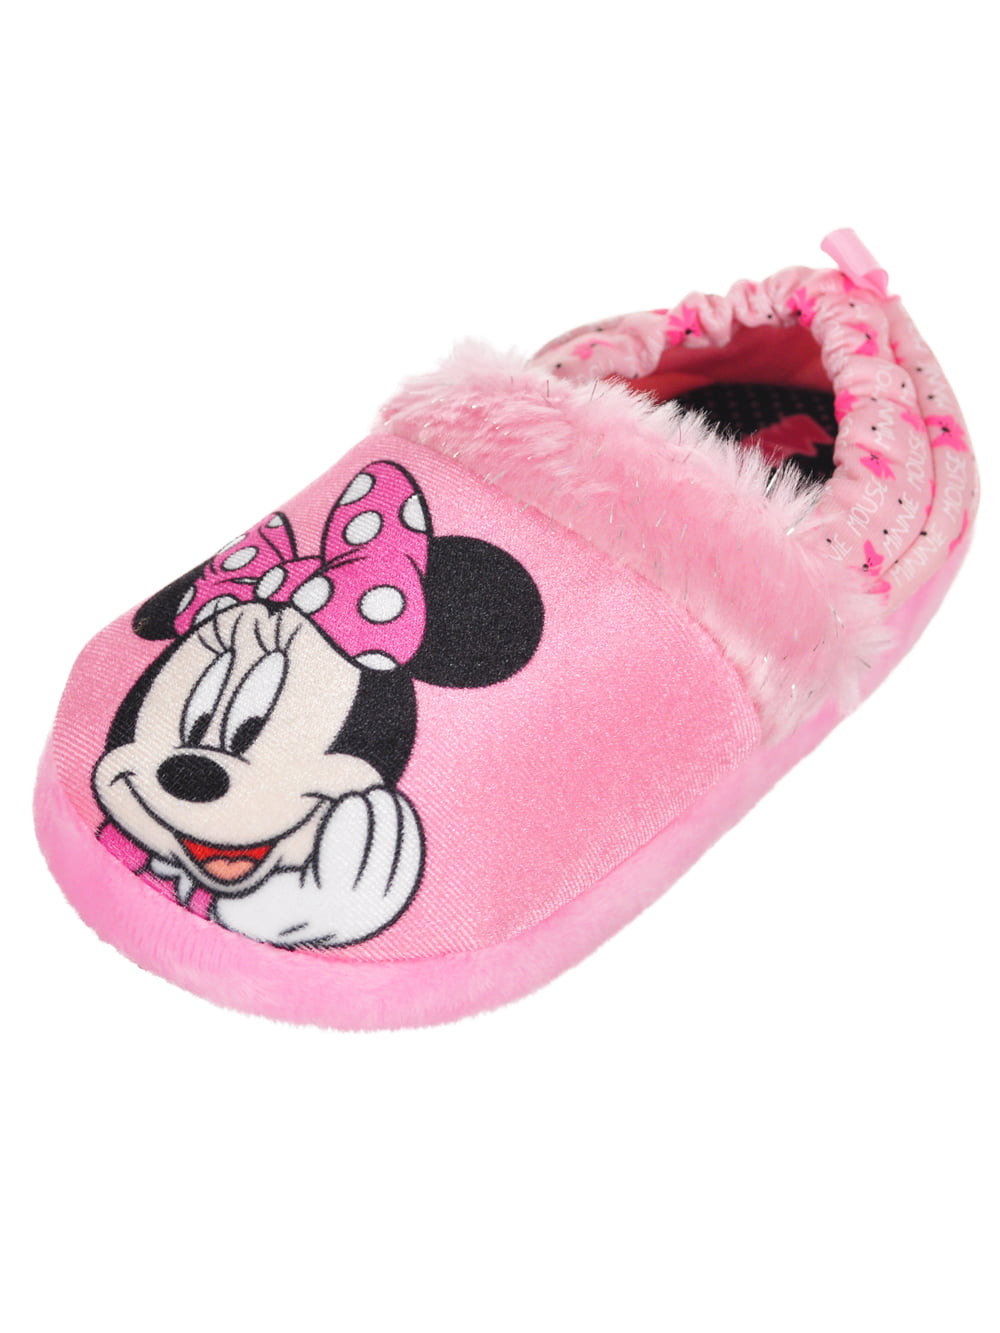 target childrens slippers